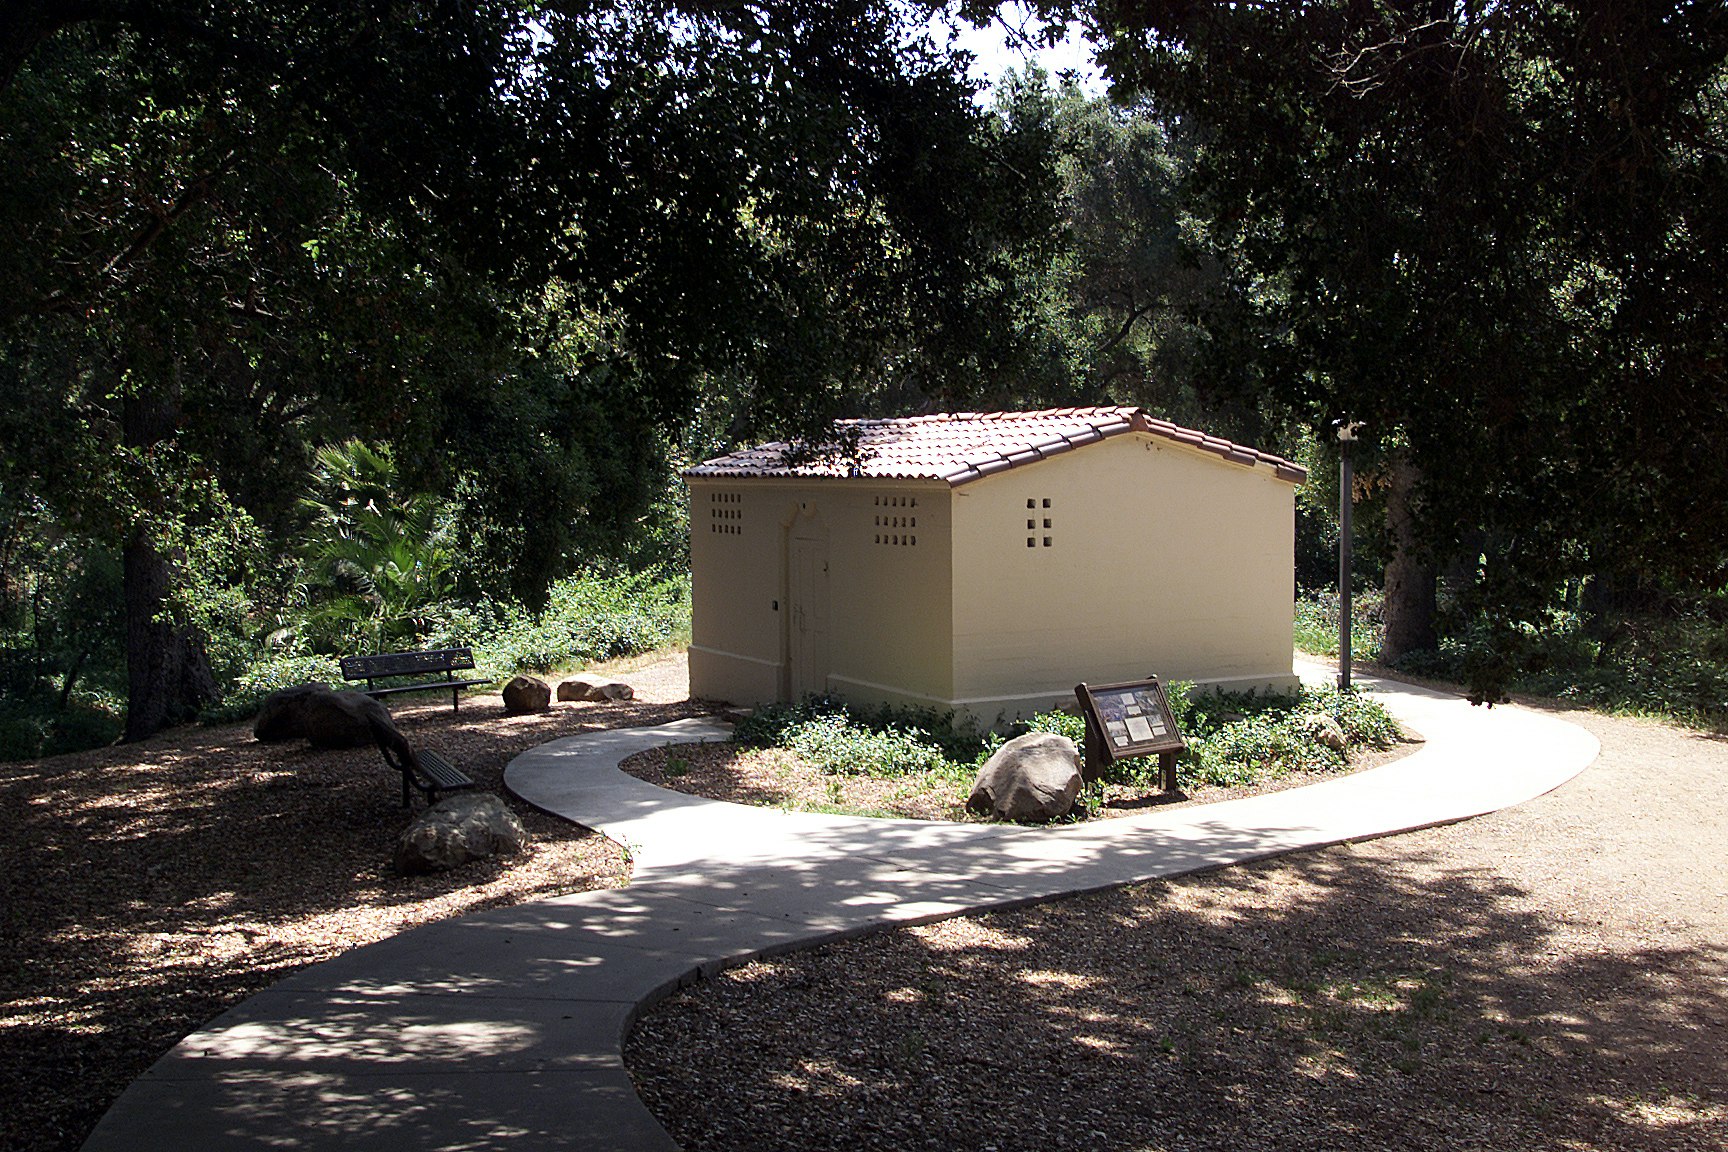 The former Ojai city jail, a small beige square building with tiny square windows and a tile roof its in a grove of trees surrounded by a sidewalk with curving organic forms.